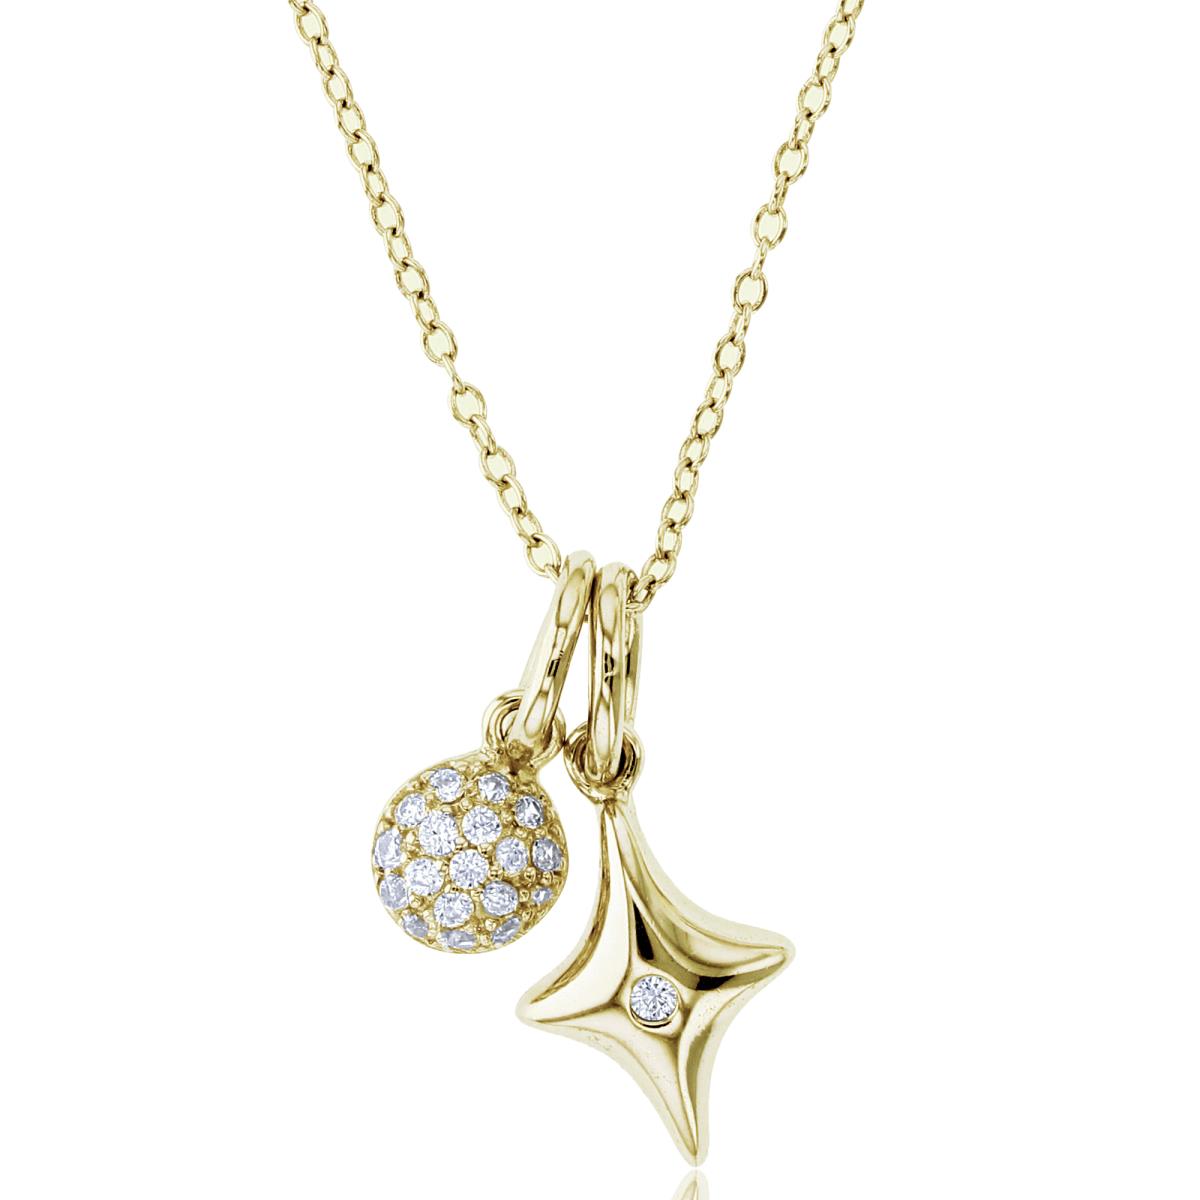 Sterling Silver+1Micron Yellow Gold Bezel Single CZ High Polish Star & Pave Puffy Ball 16+2"Necklace